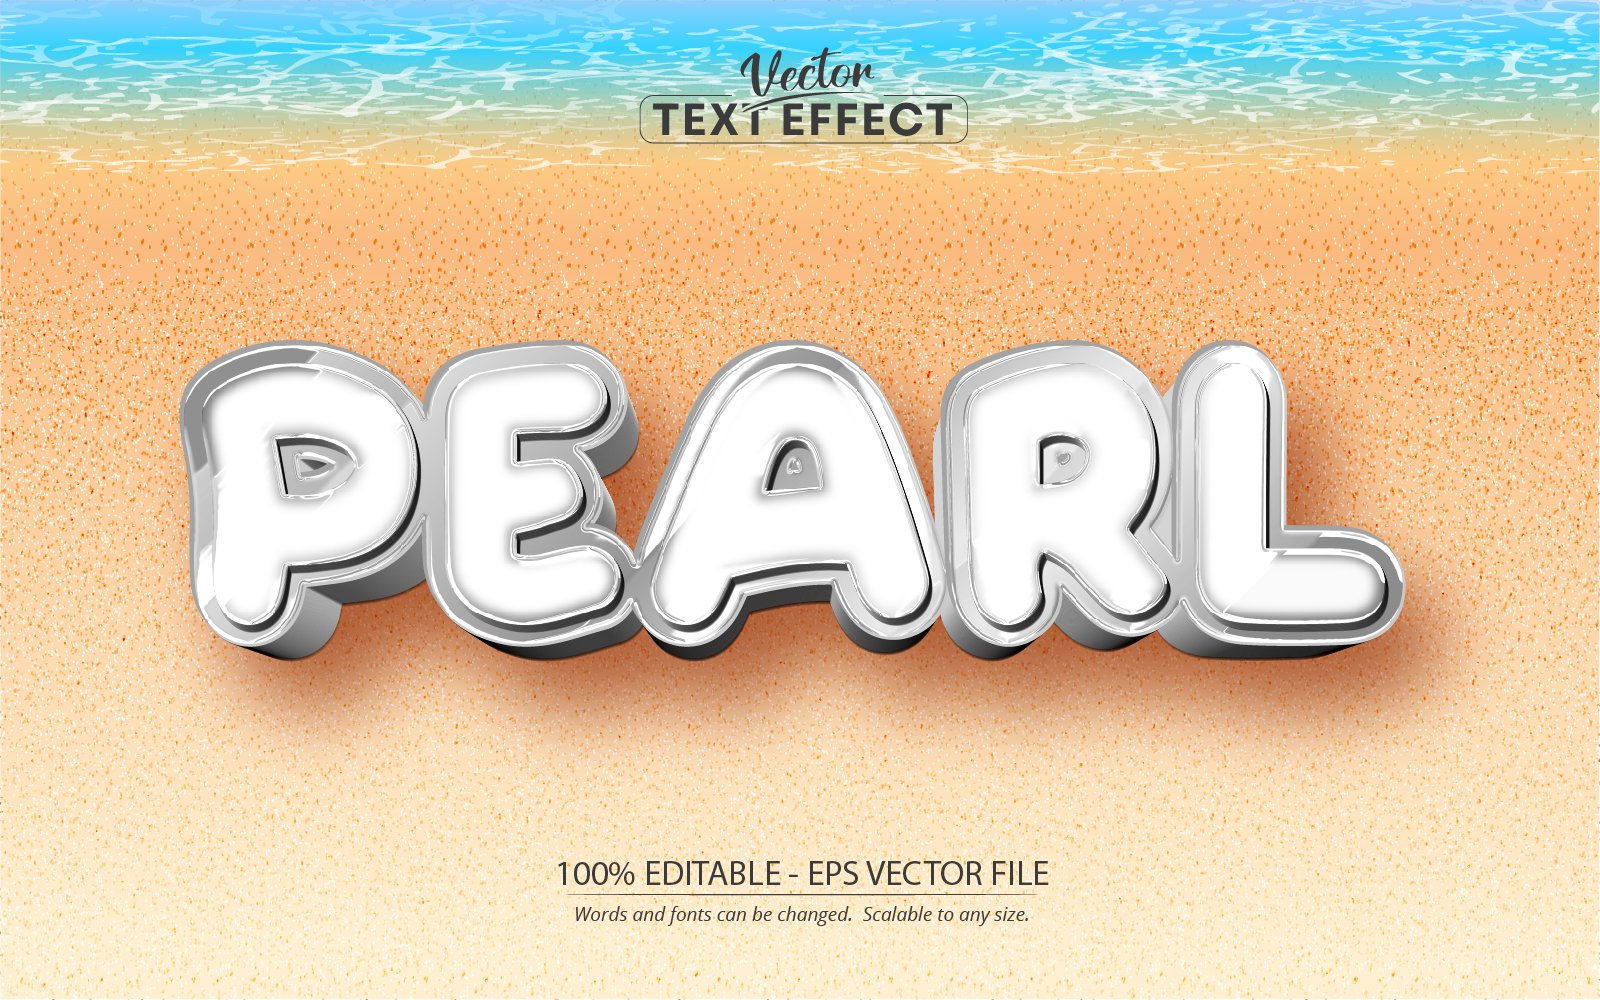 Pearl - Editable Text Effect, Comic And Cartoon Text Style, Graphics Illustration